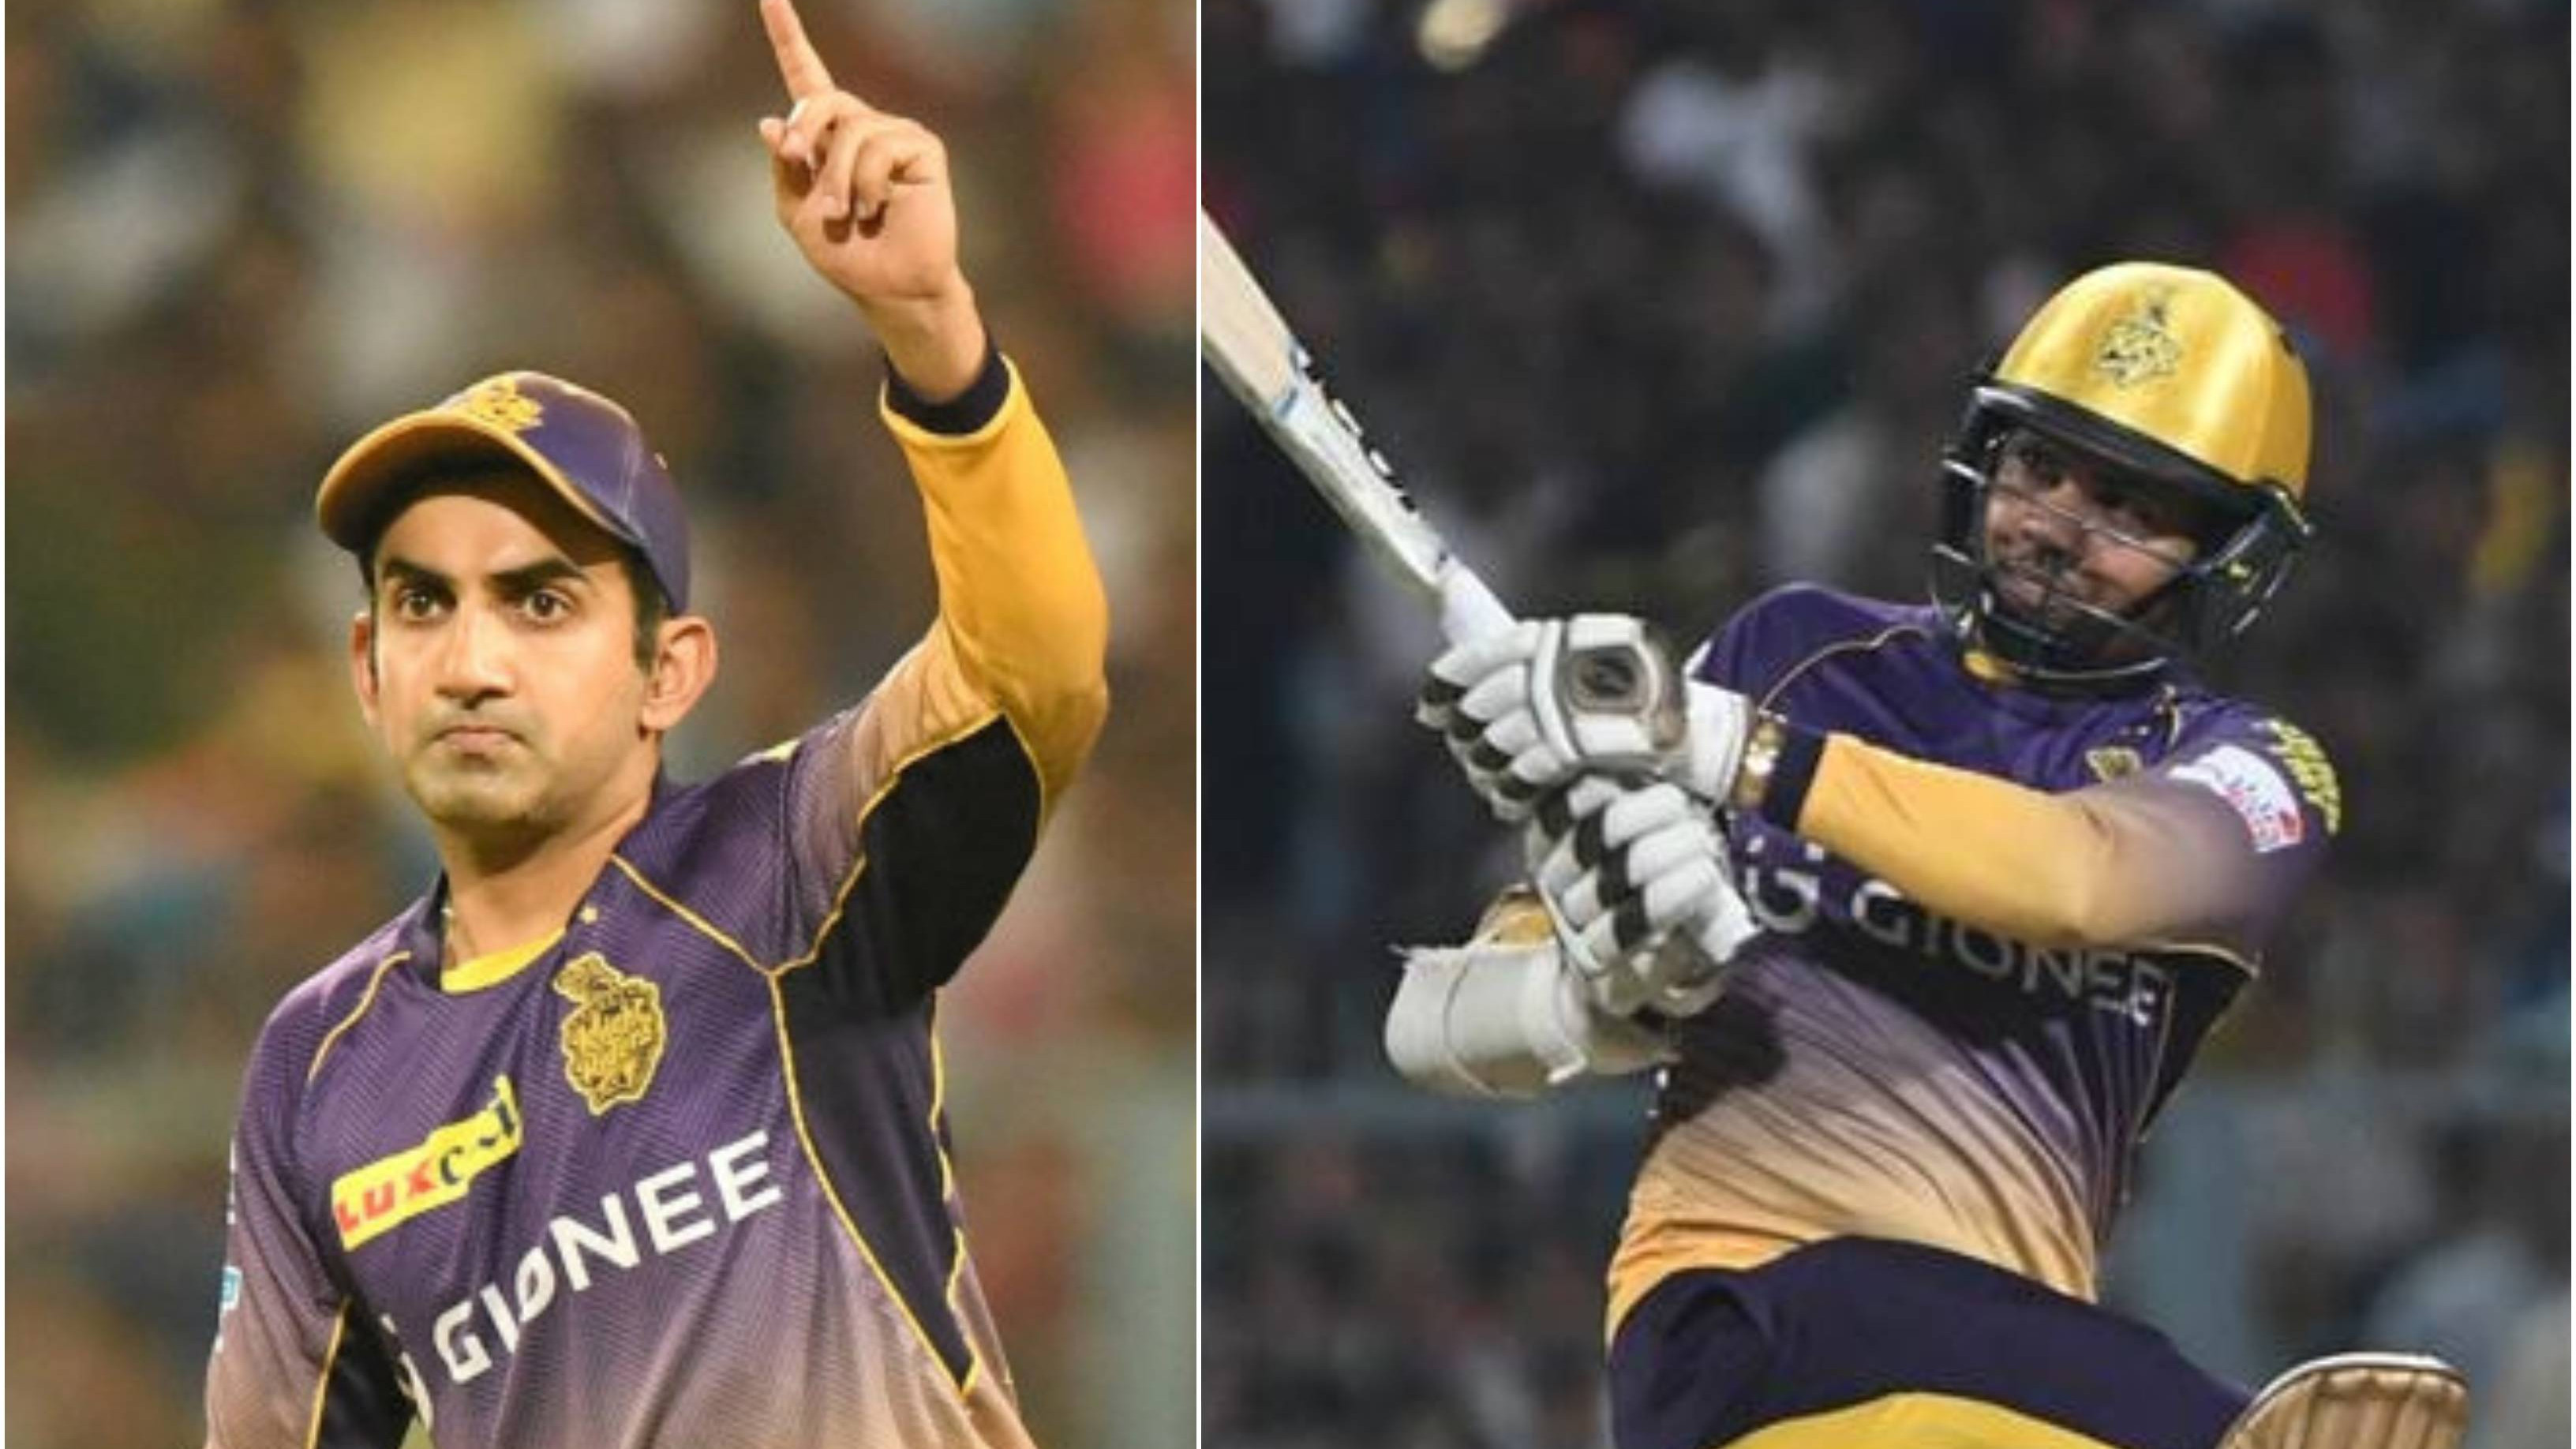 “Opposition didn't take me seriously”, Sunil Narine recalls how Gambhir showed his trust on him as opener for KKR